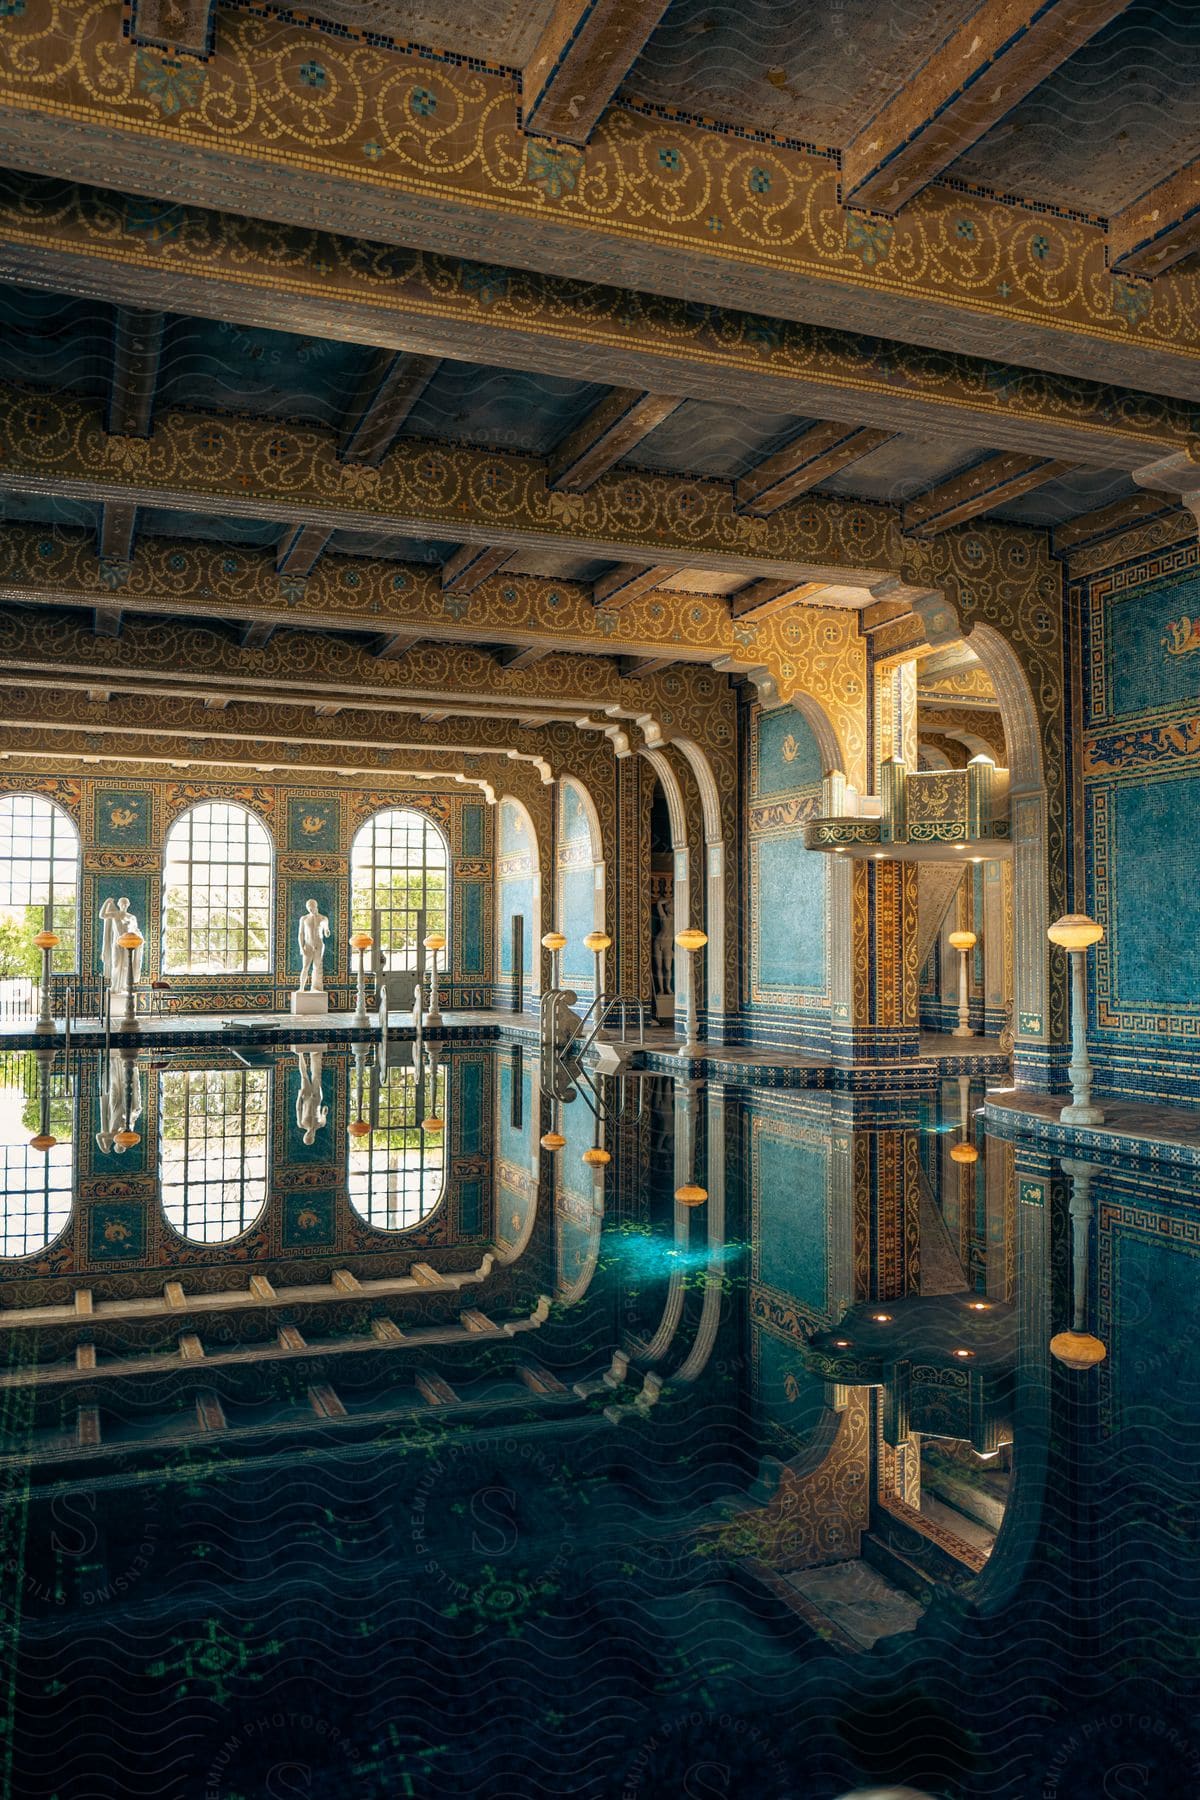 Ornately decorated interior of a building with yellow and teal patterns reflecting in a pool